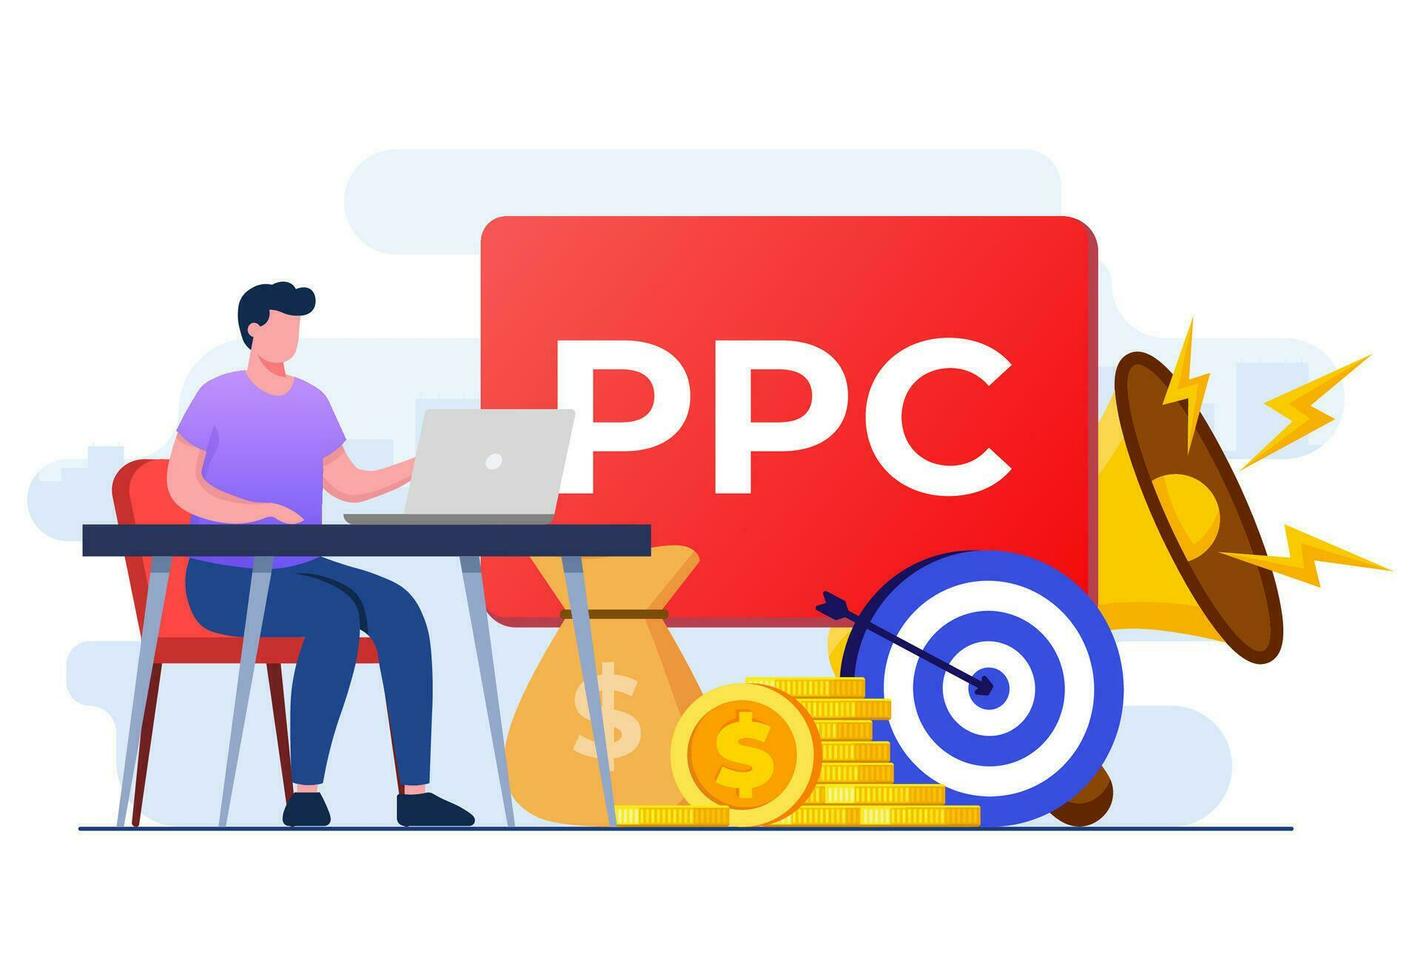 Paid advertising campaign display ads on website generating revenue for publisher, Pay per click concept, PPC, Advertising or advertisement, Promoting brands to audience, Internet marketing concept vector